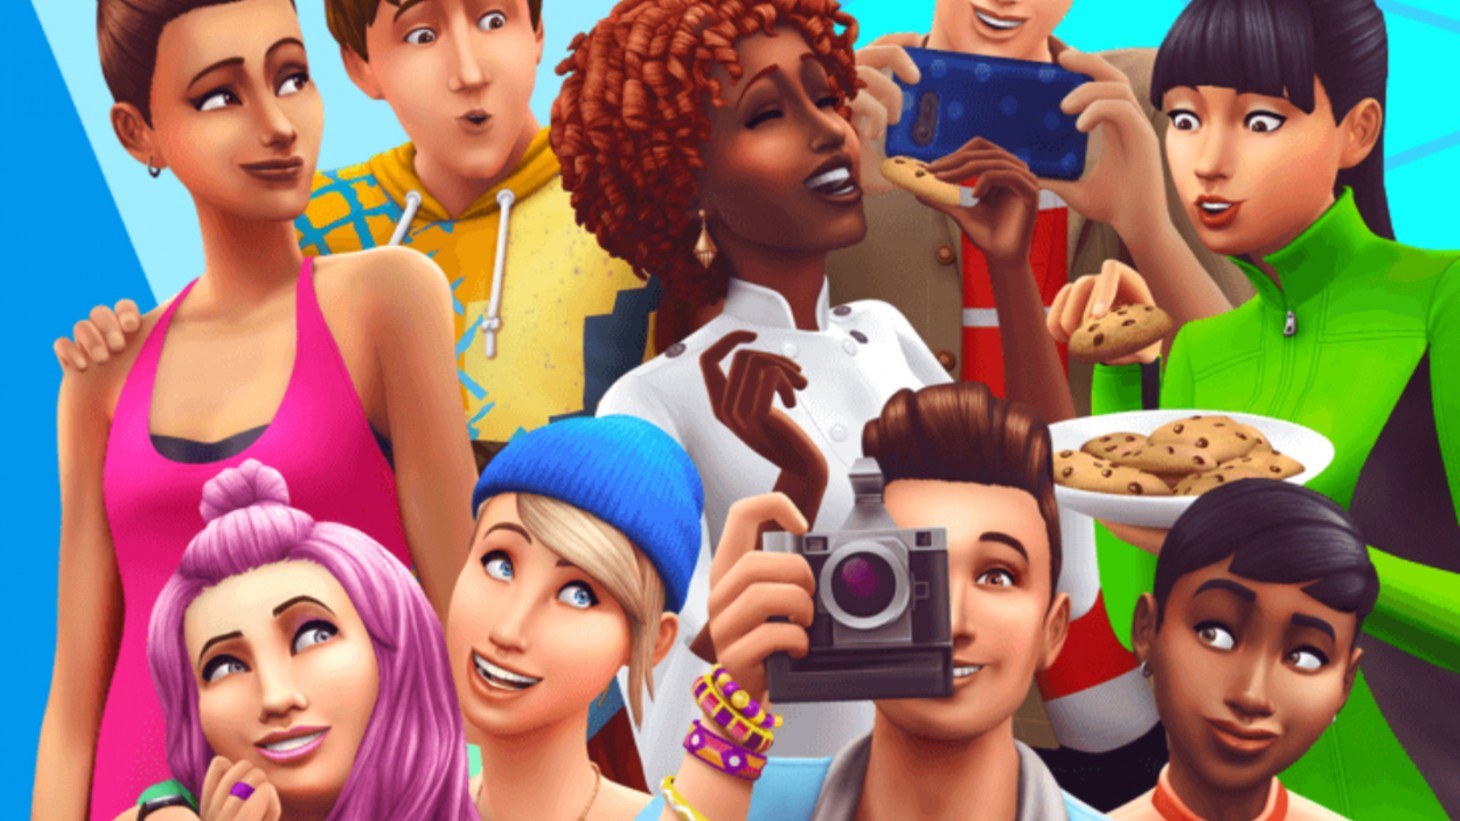 The Sims 4 Free-to-Play